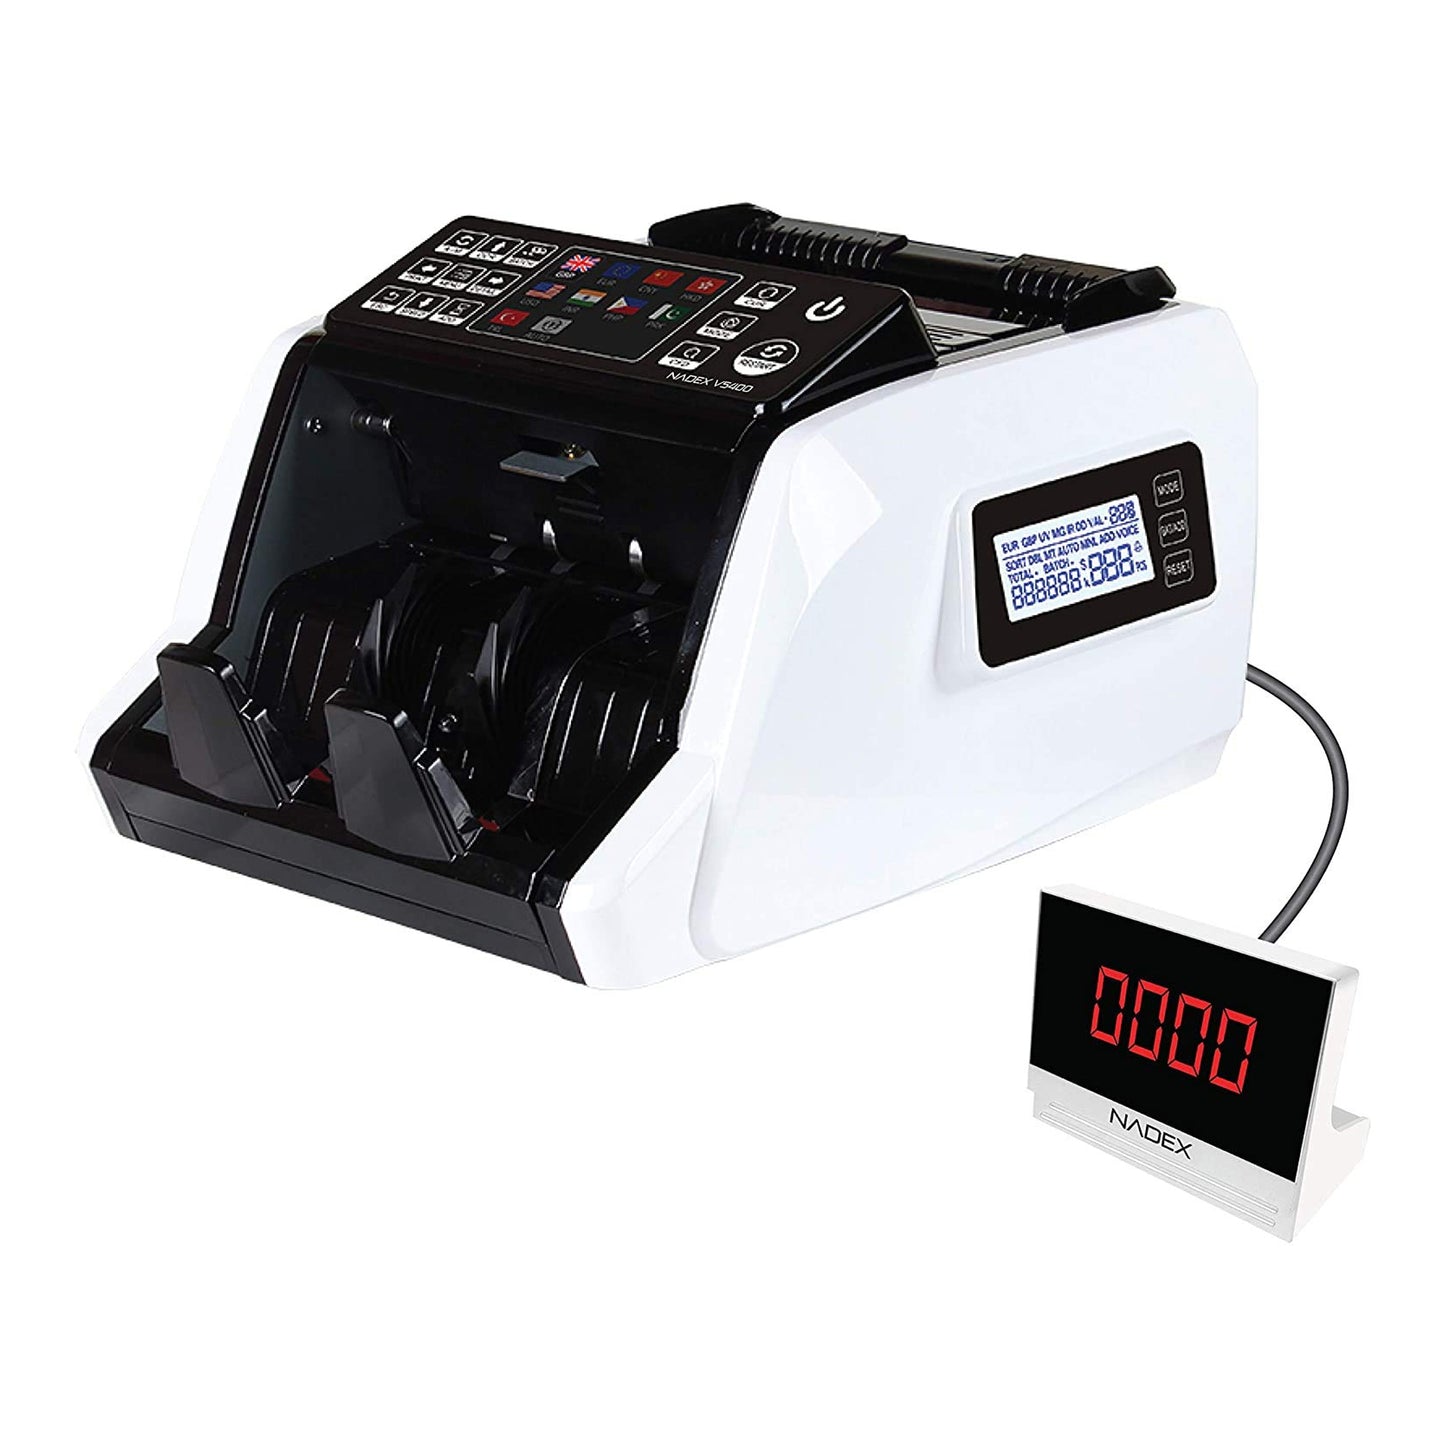 Nadex V5400 Mixed Denomination Money Counter and Counterfeit Detector